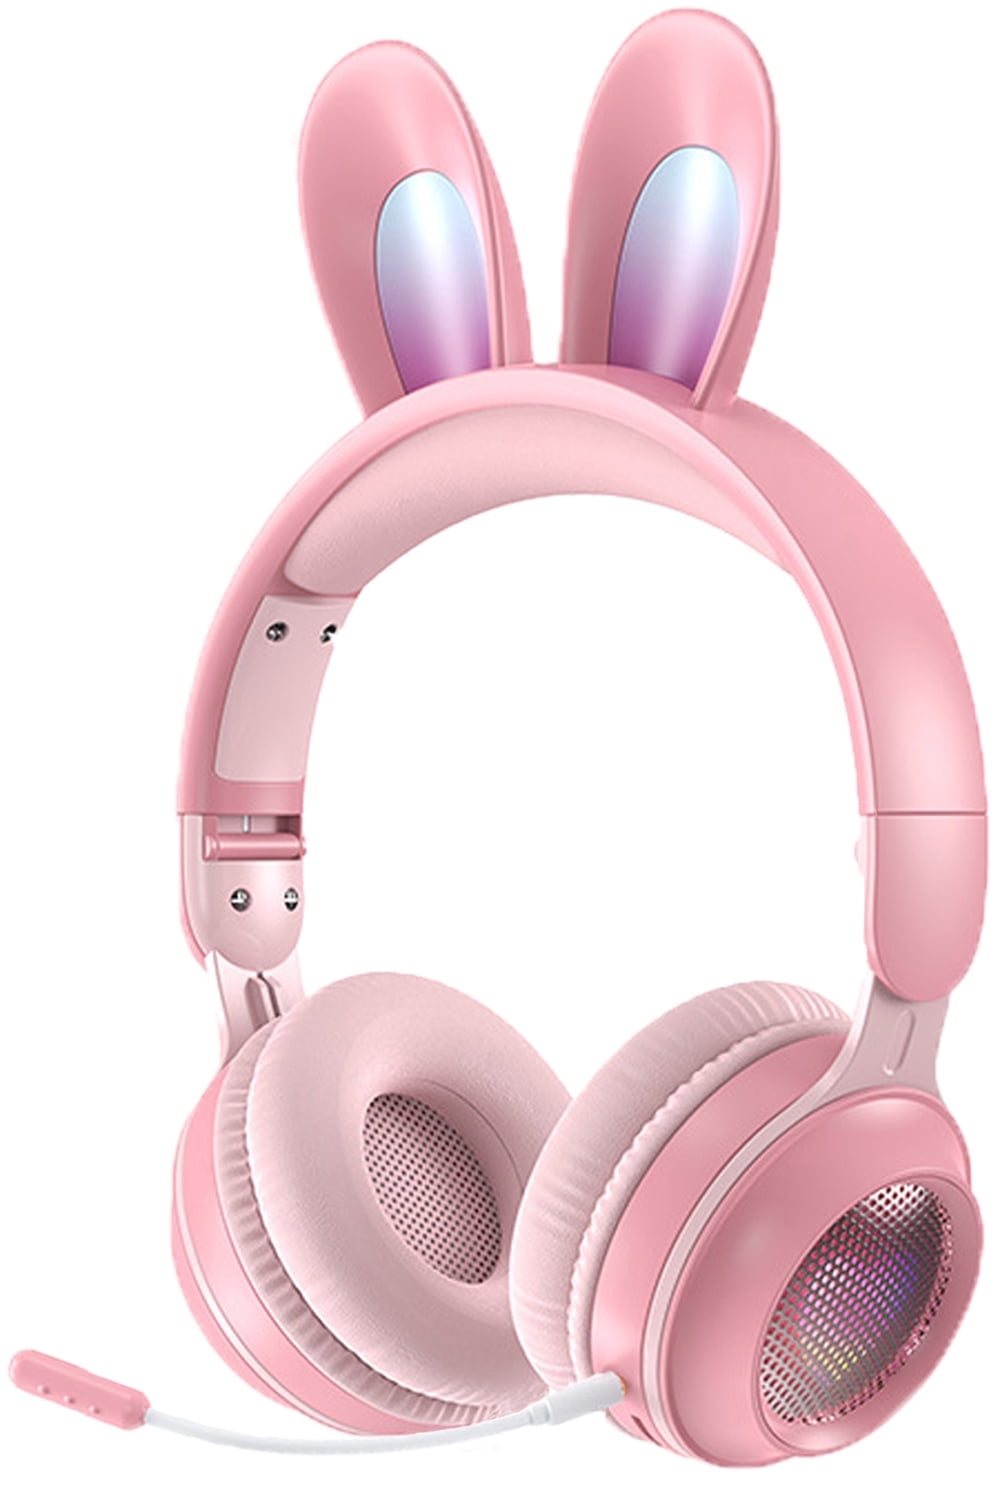 Over-Ear Bluetooth Headphones with Bunny Ears, Wireless Headphones for Kids  Girls, Noise-Canceling Mic, Surround Stereo Sound, Pink 